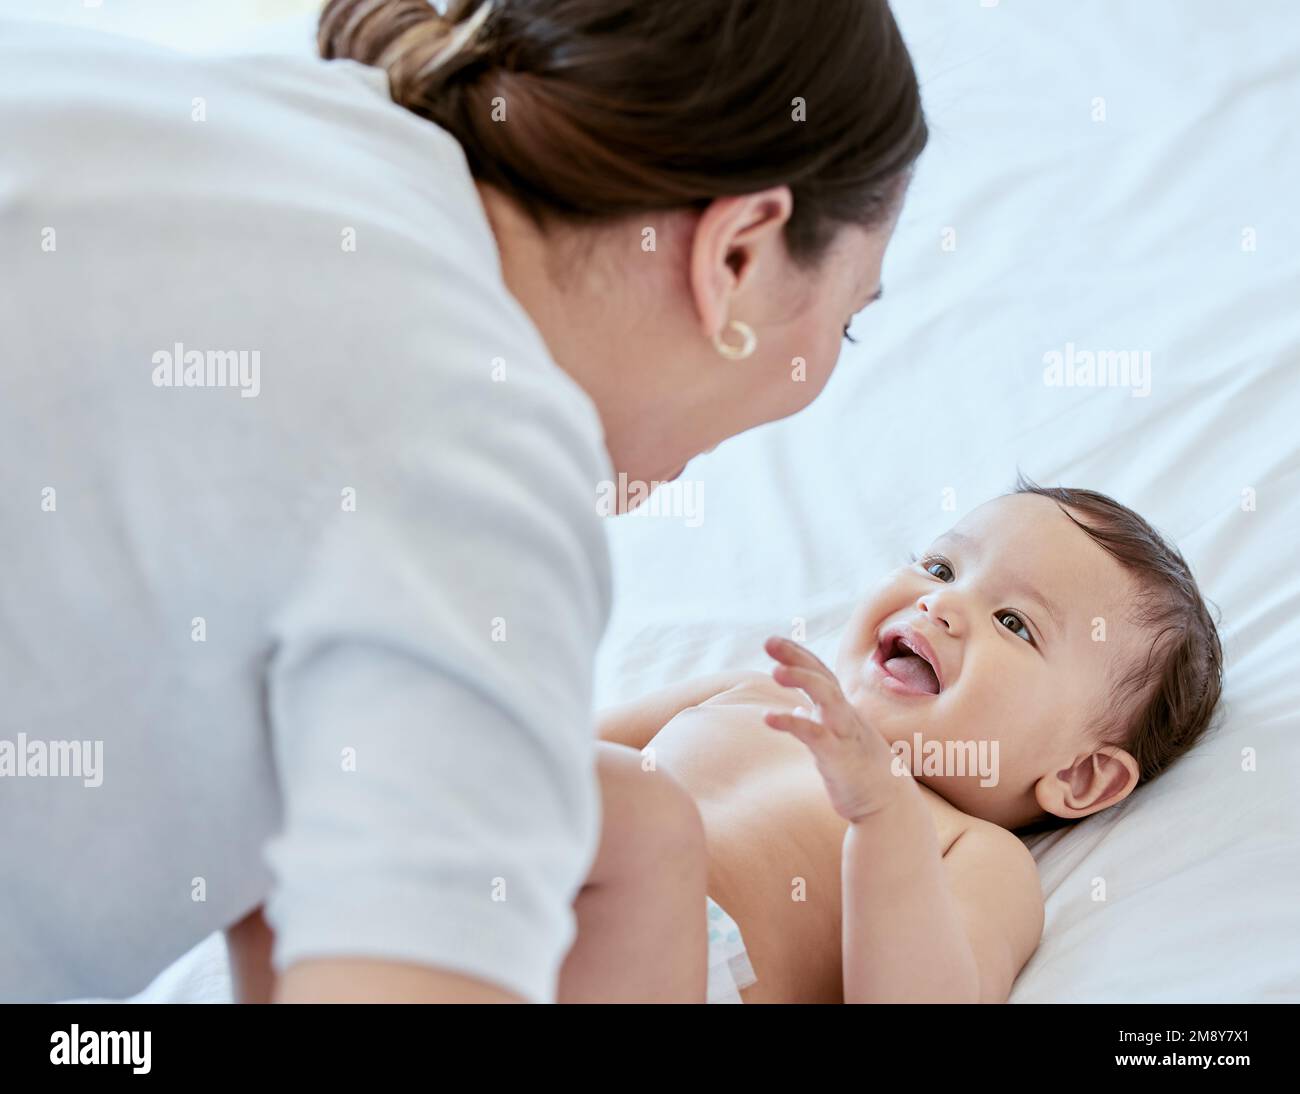 Tummy laughter. a young mother bonding with her baby at home. Stock Photo